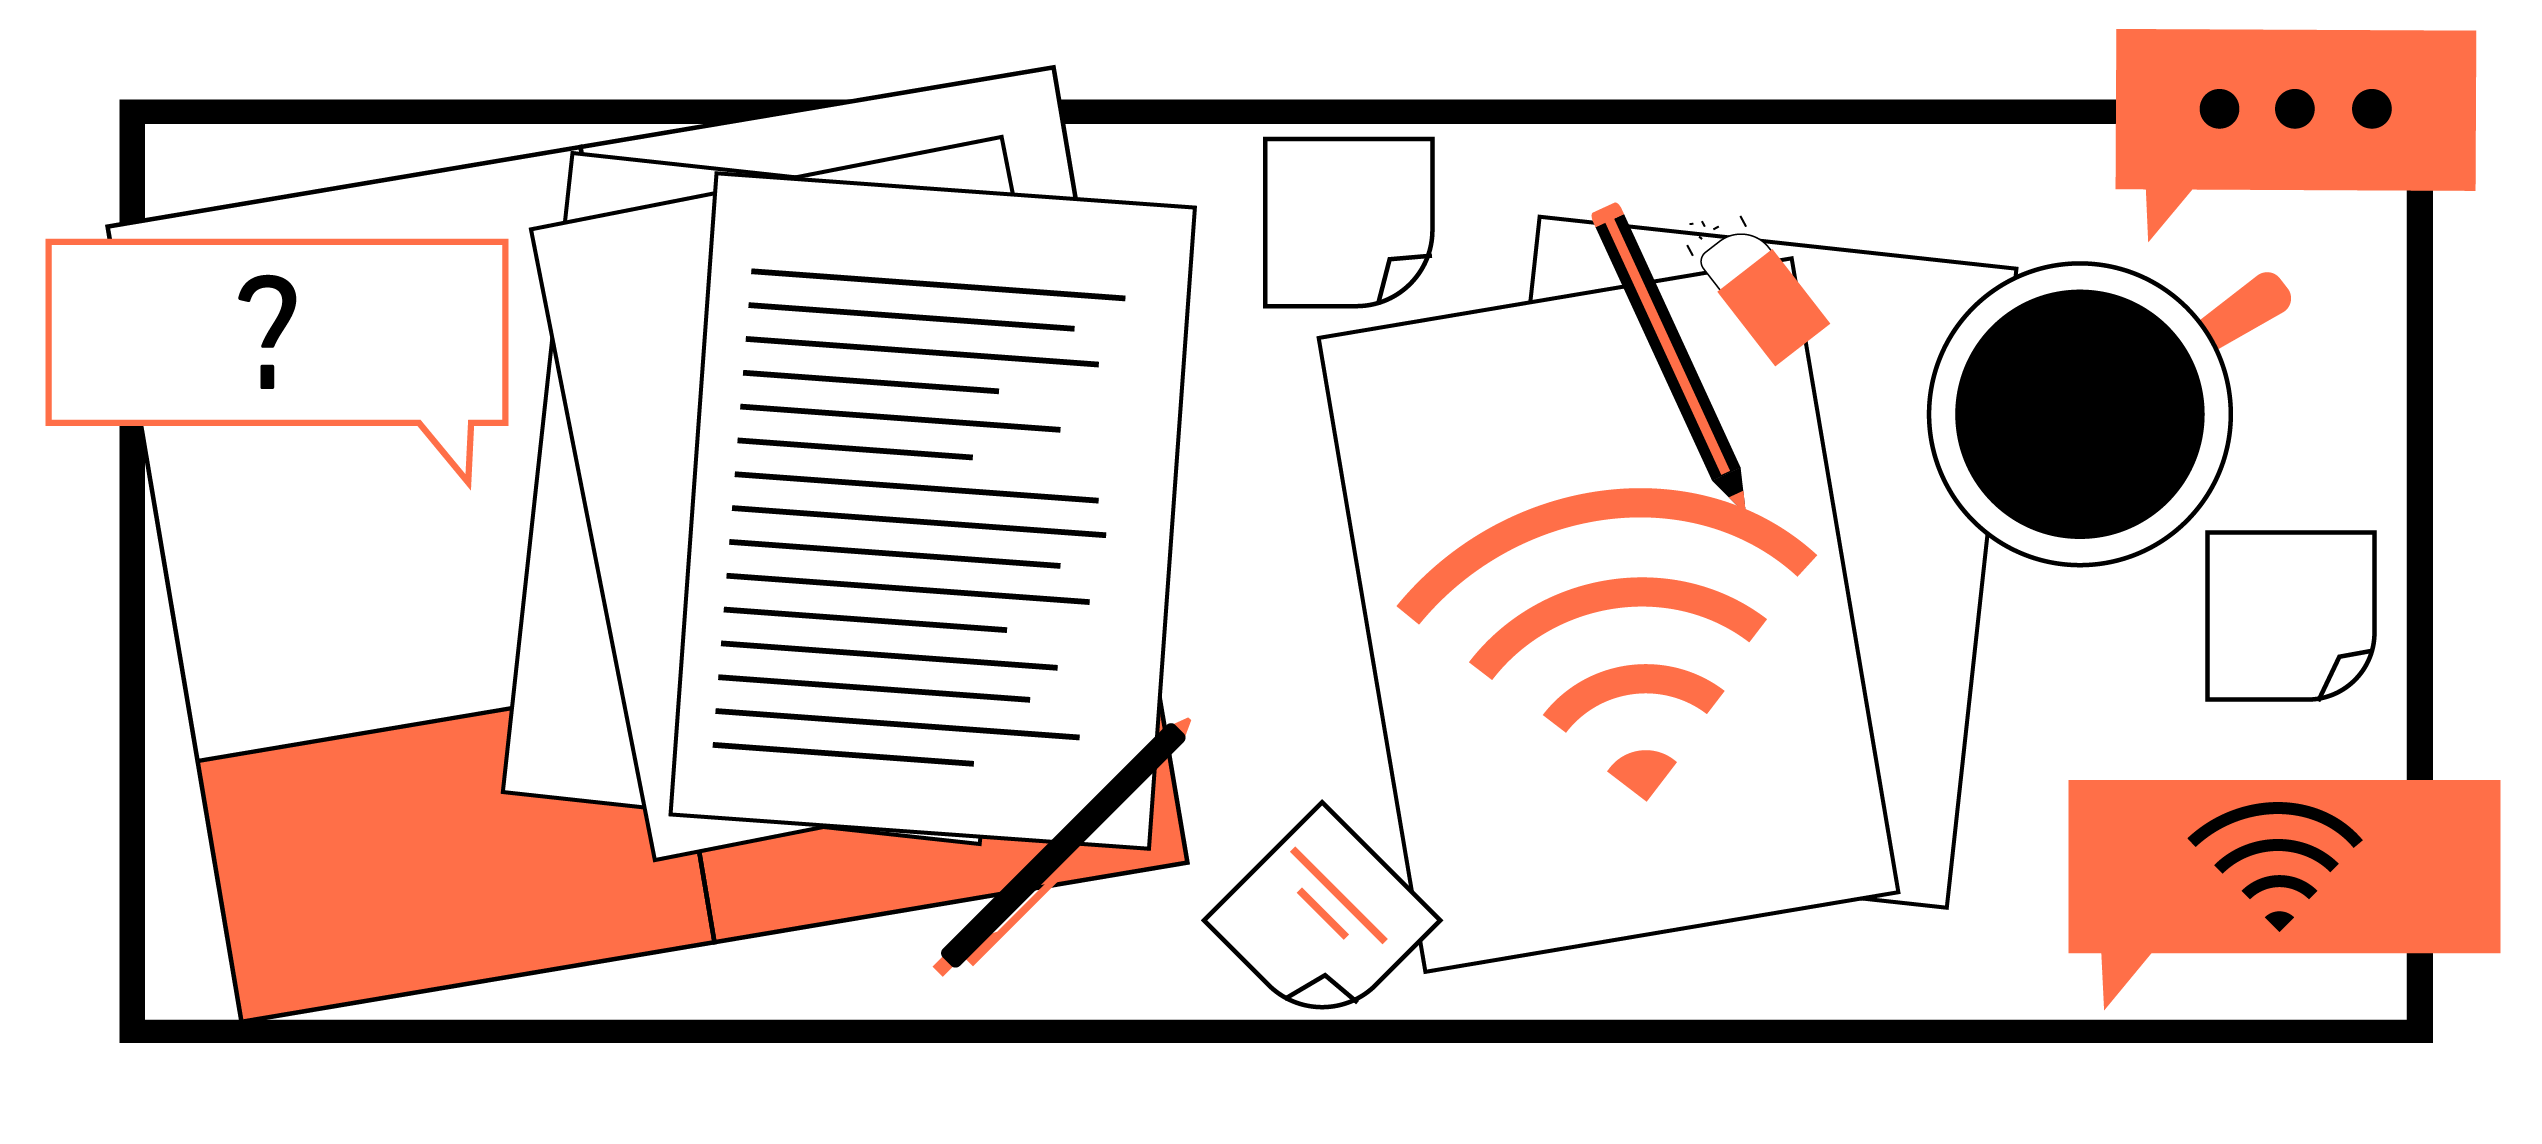 Illustration of a desk with multiple documents and notes on it.